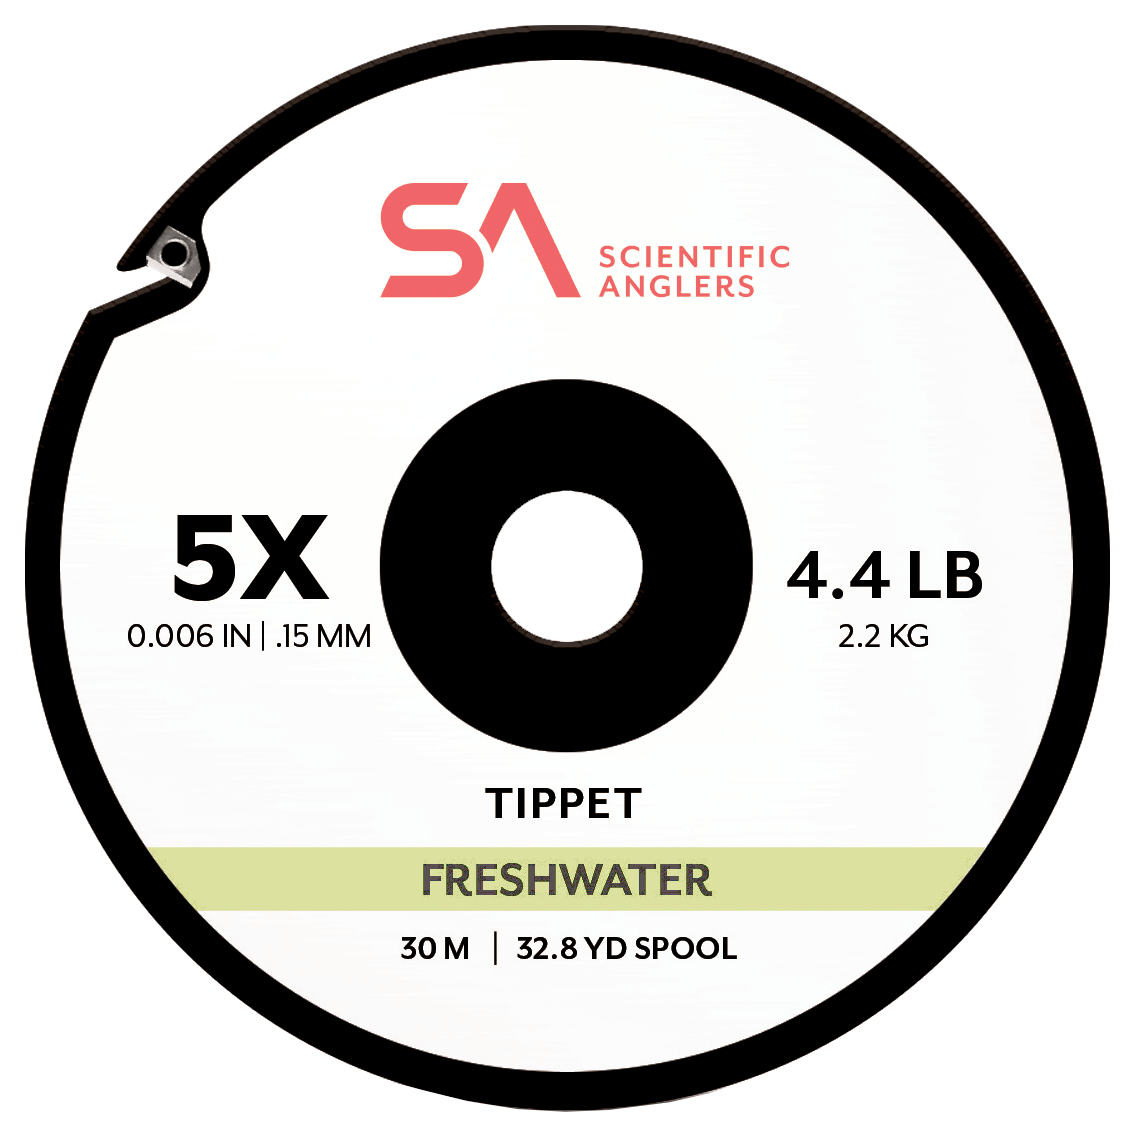 Scientific Angler Freshwater Tippet - 4X